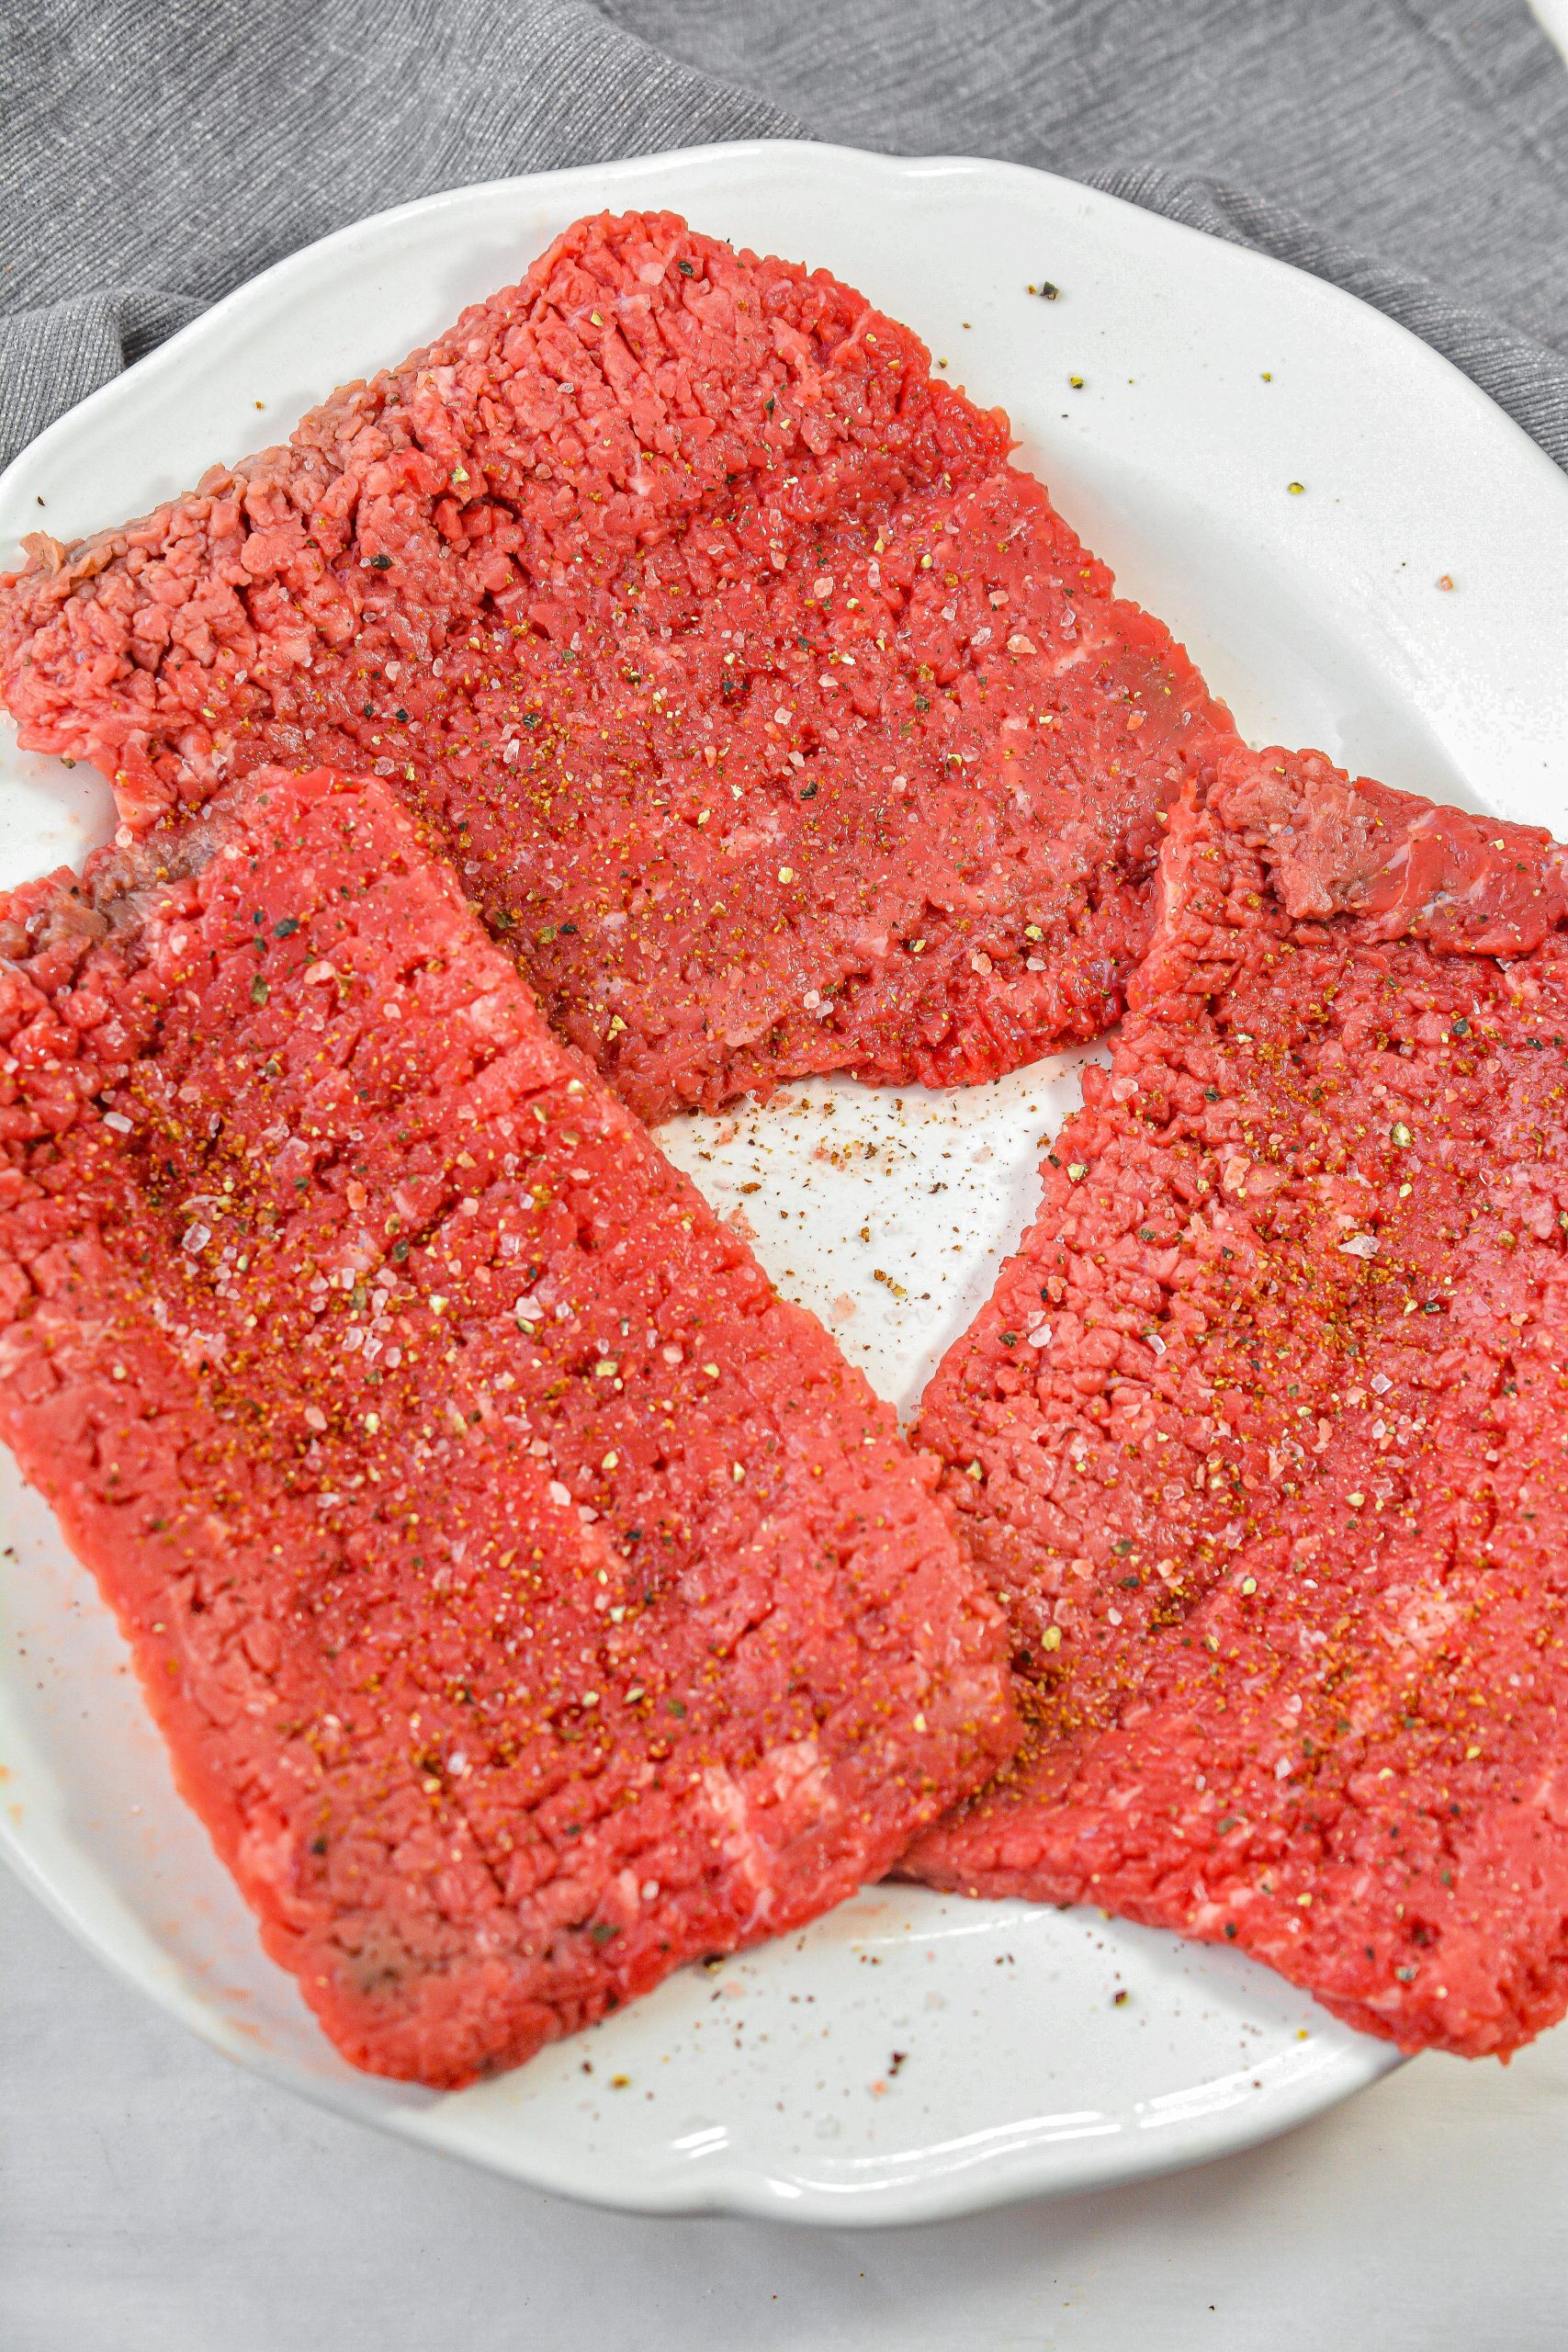 Season the cube steak on both sides with the cajun seasoning as well as salt and pepper to taste.